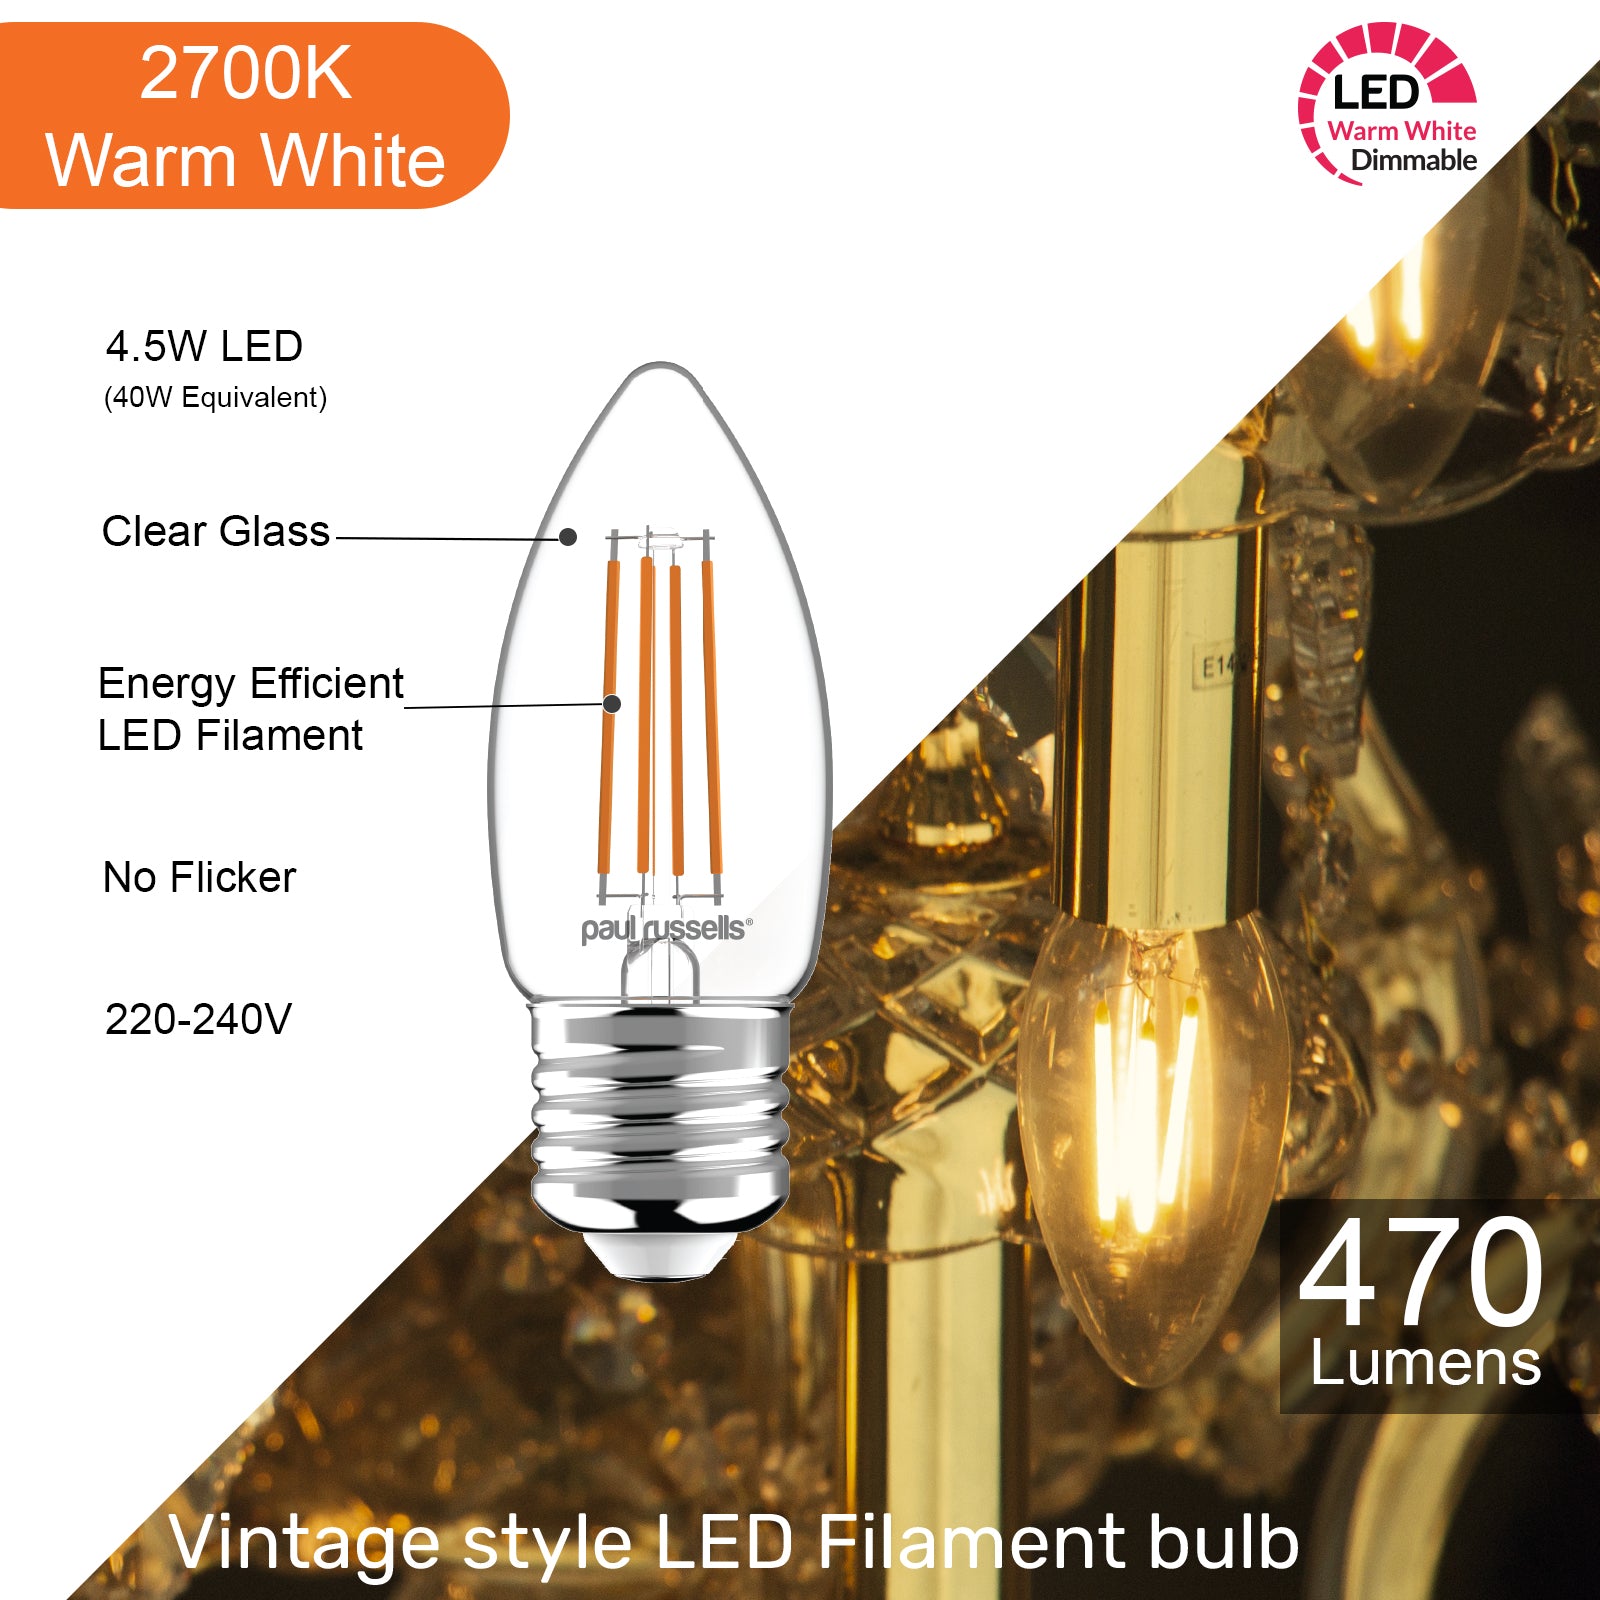 LED Dimmable Filament Candle 4.5W (40w), ES/E27, 470 Lumens, Warm White(2700K), 240V